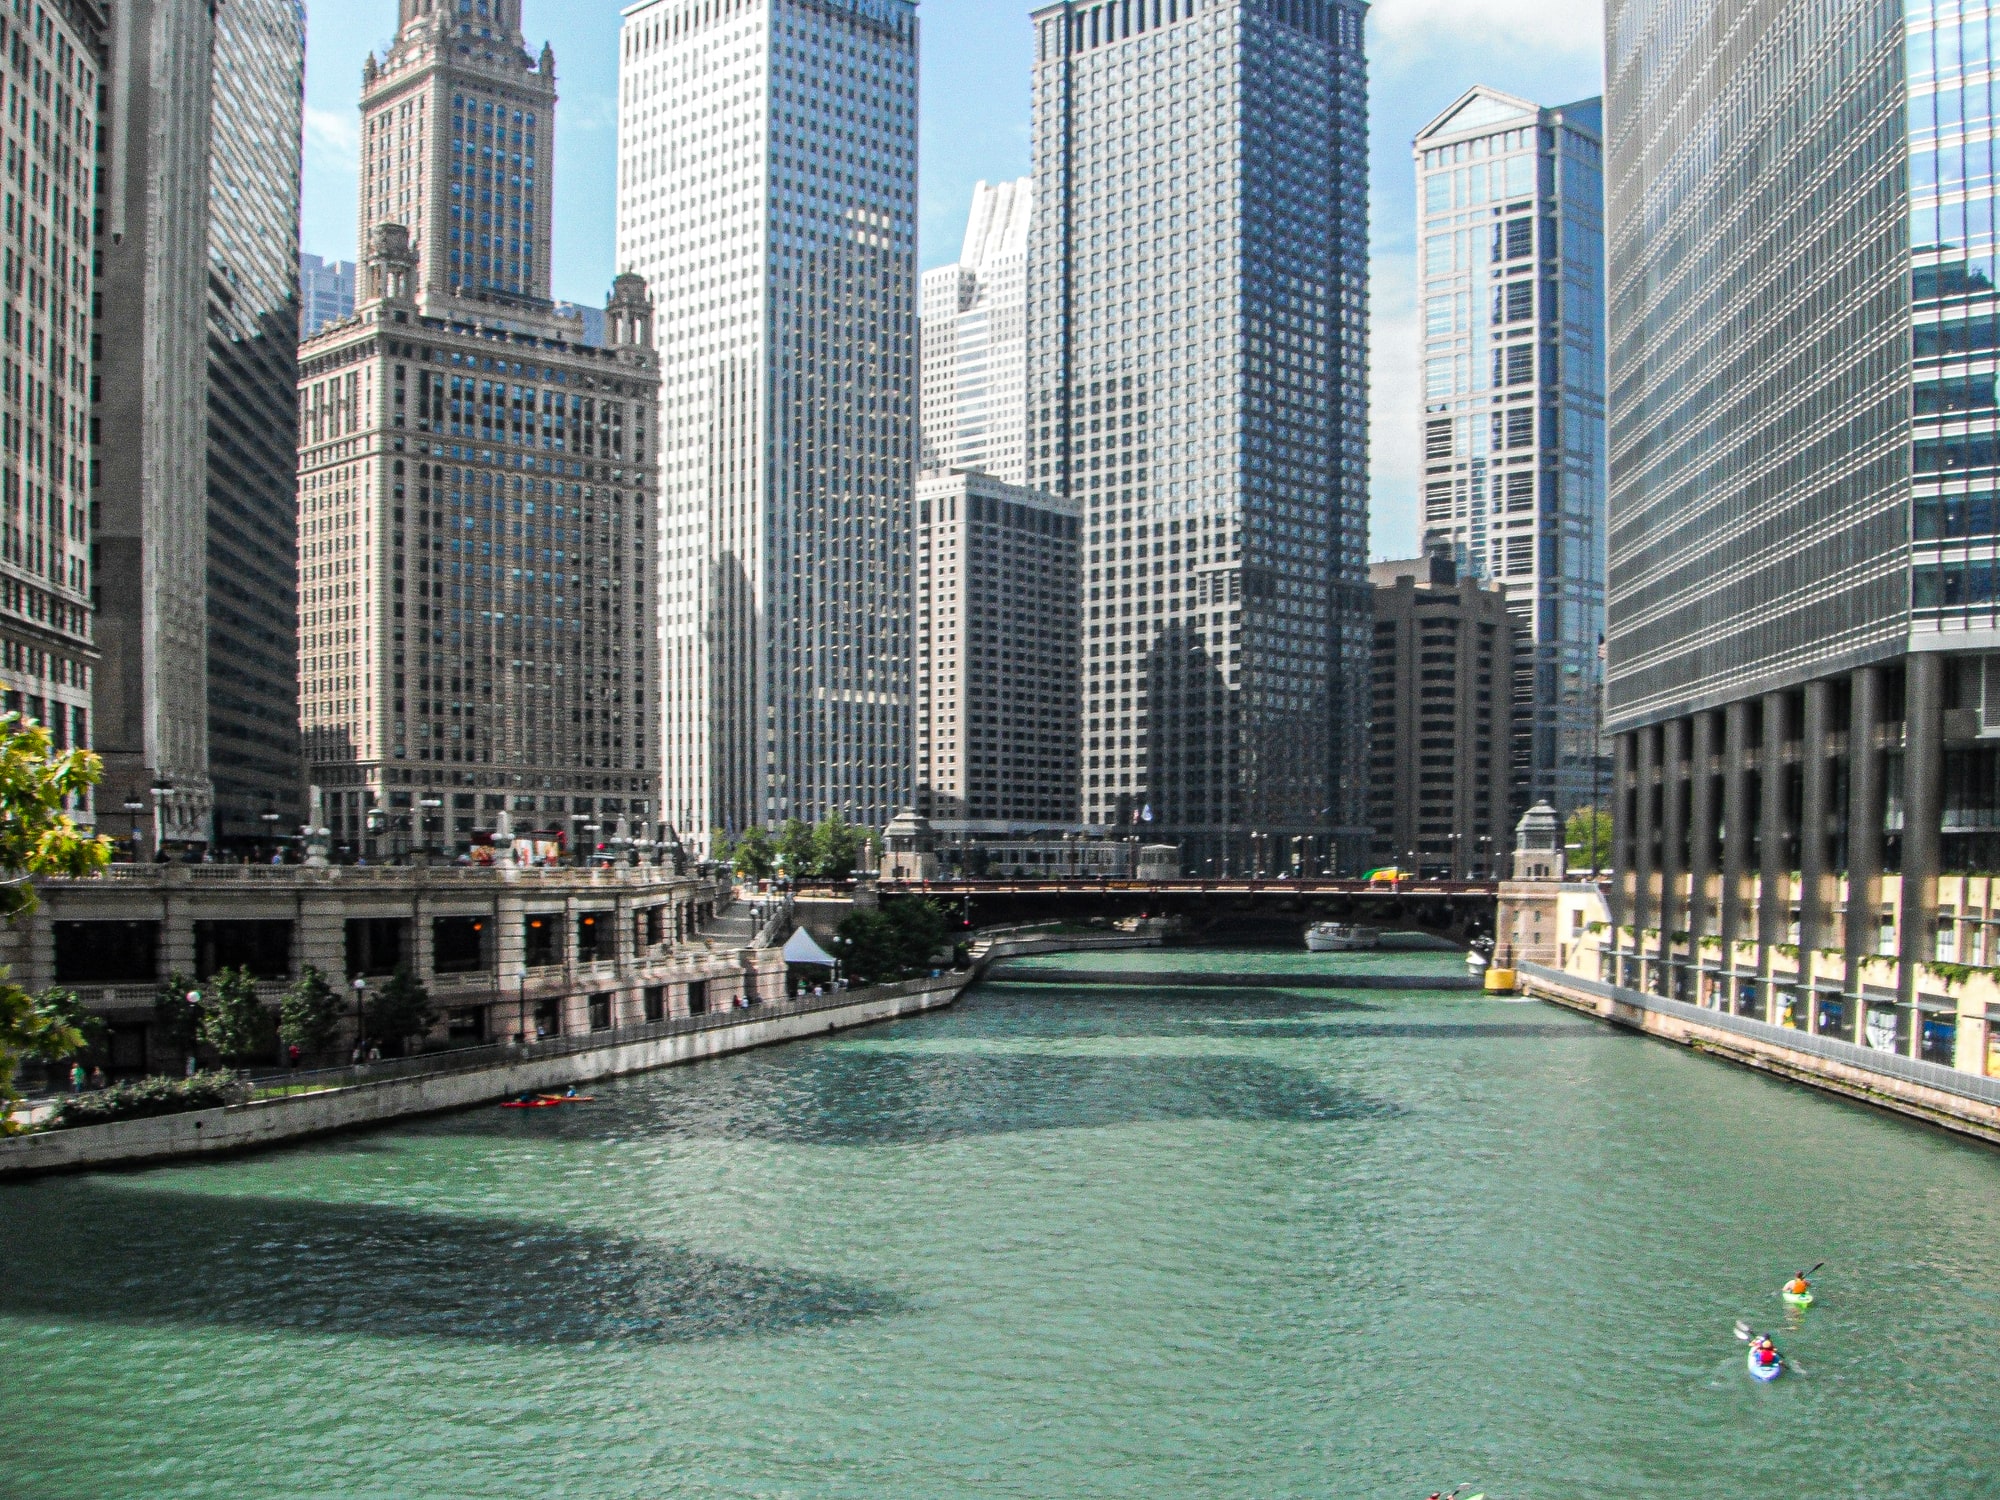 The Chicago River in Downtown Chicago.